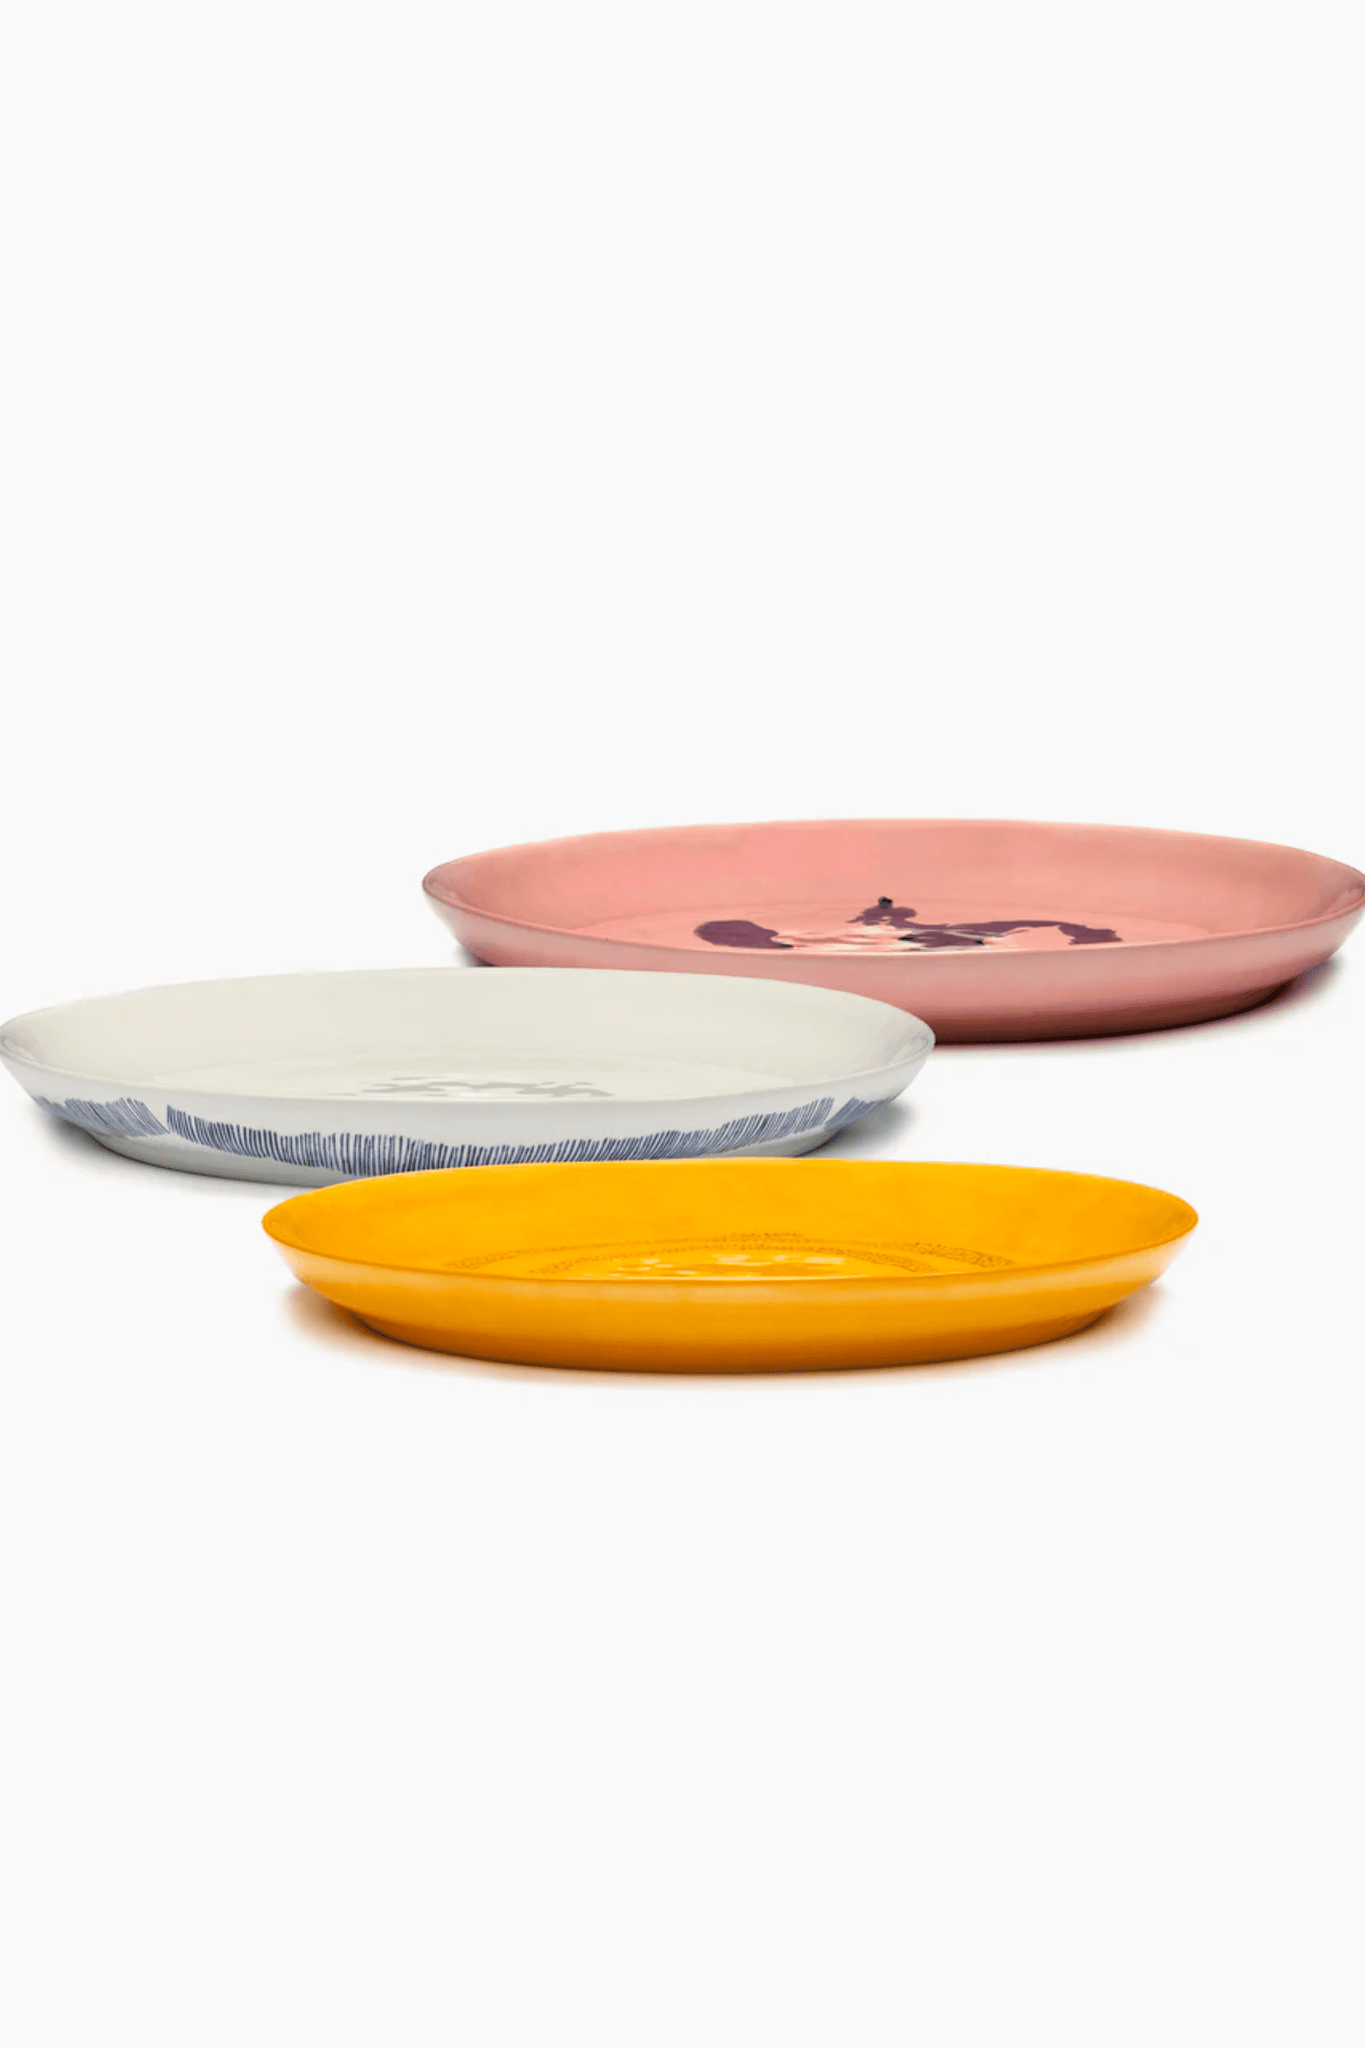 Small Serving Plate, White Swirl with Blue Stripes Ottolenghi Serax, shown with other serving plates